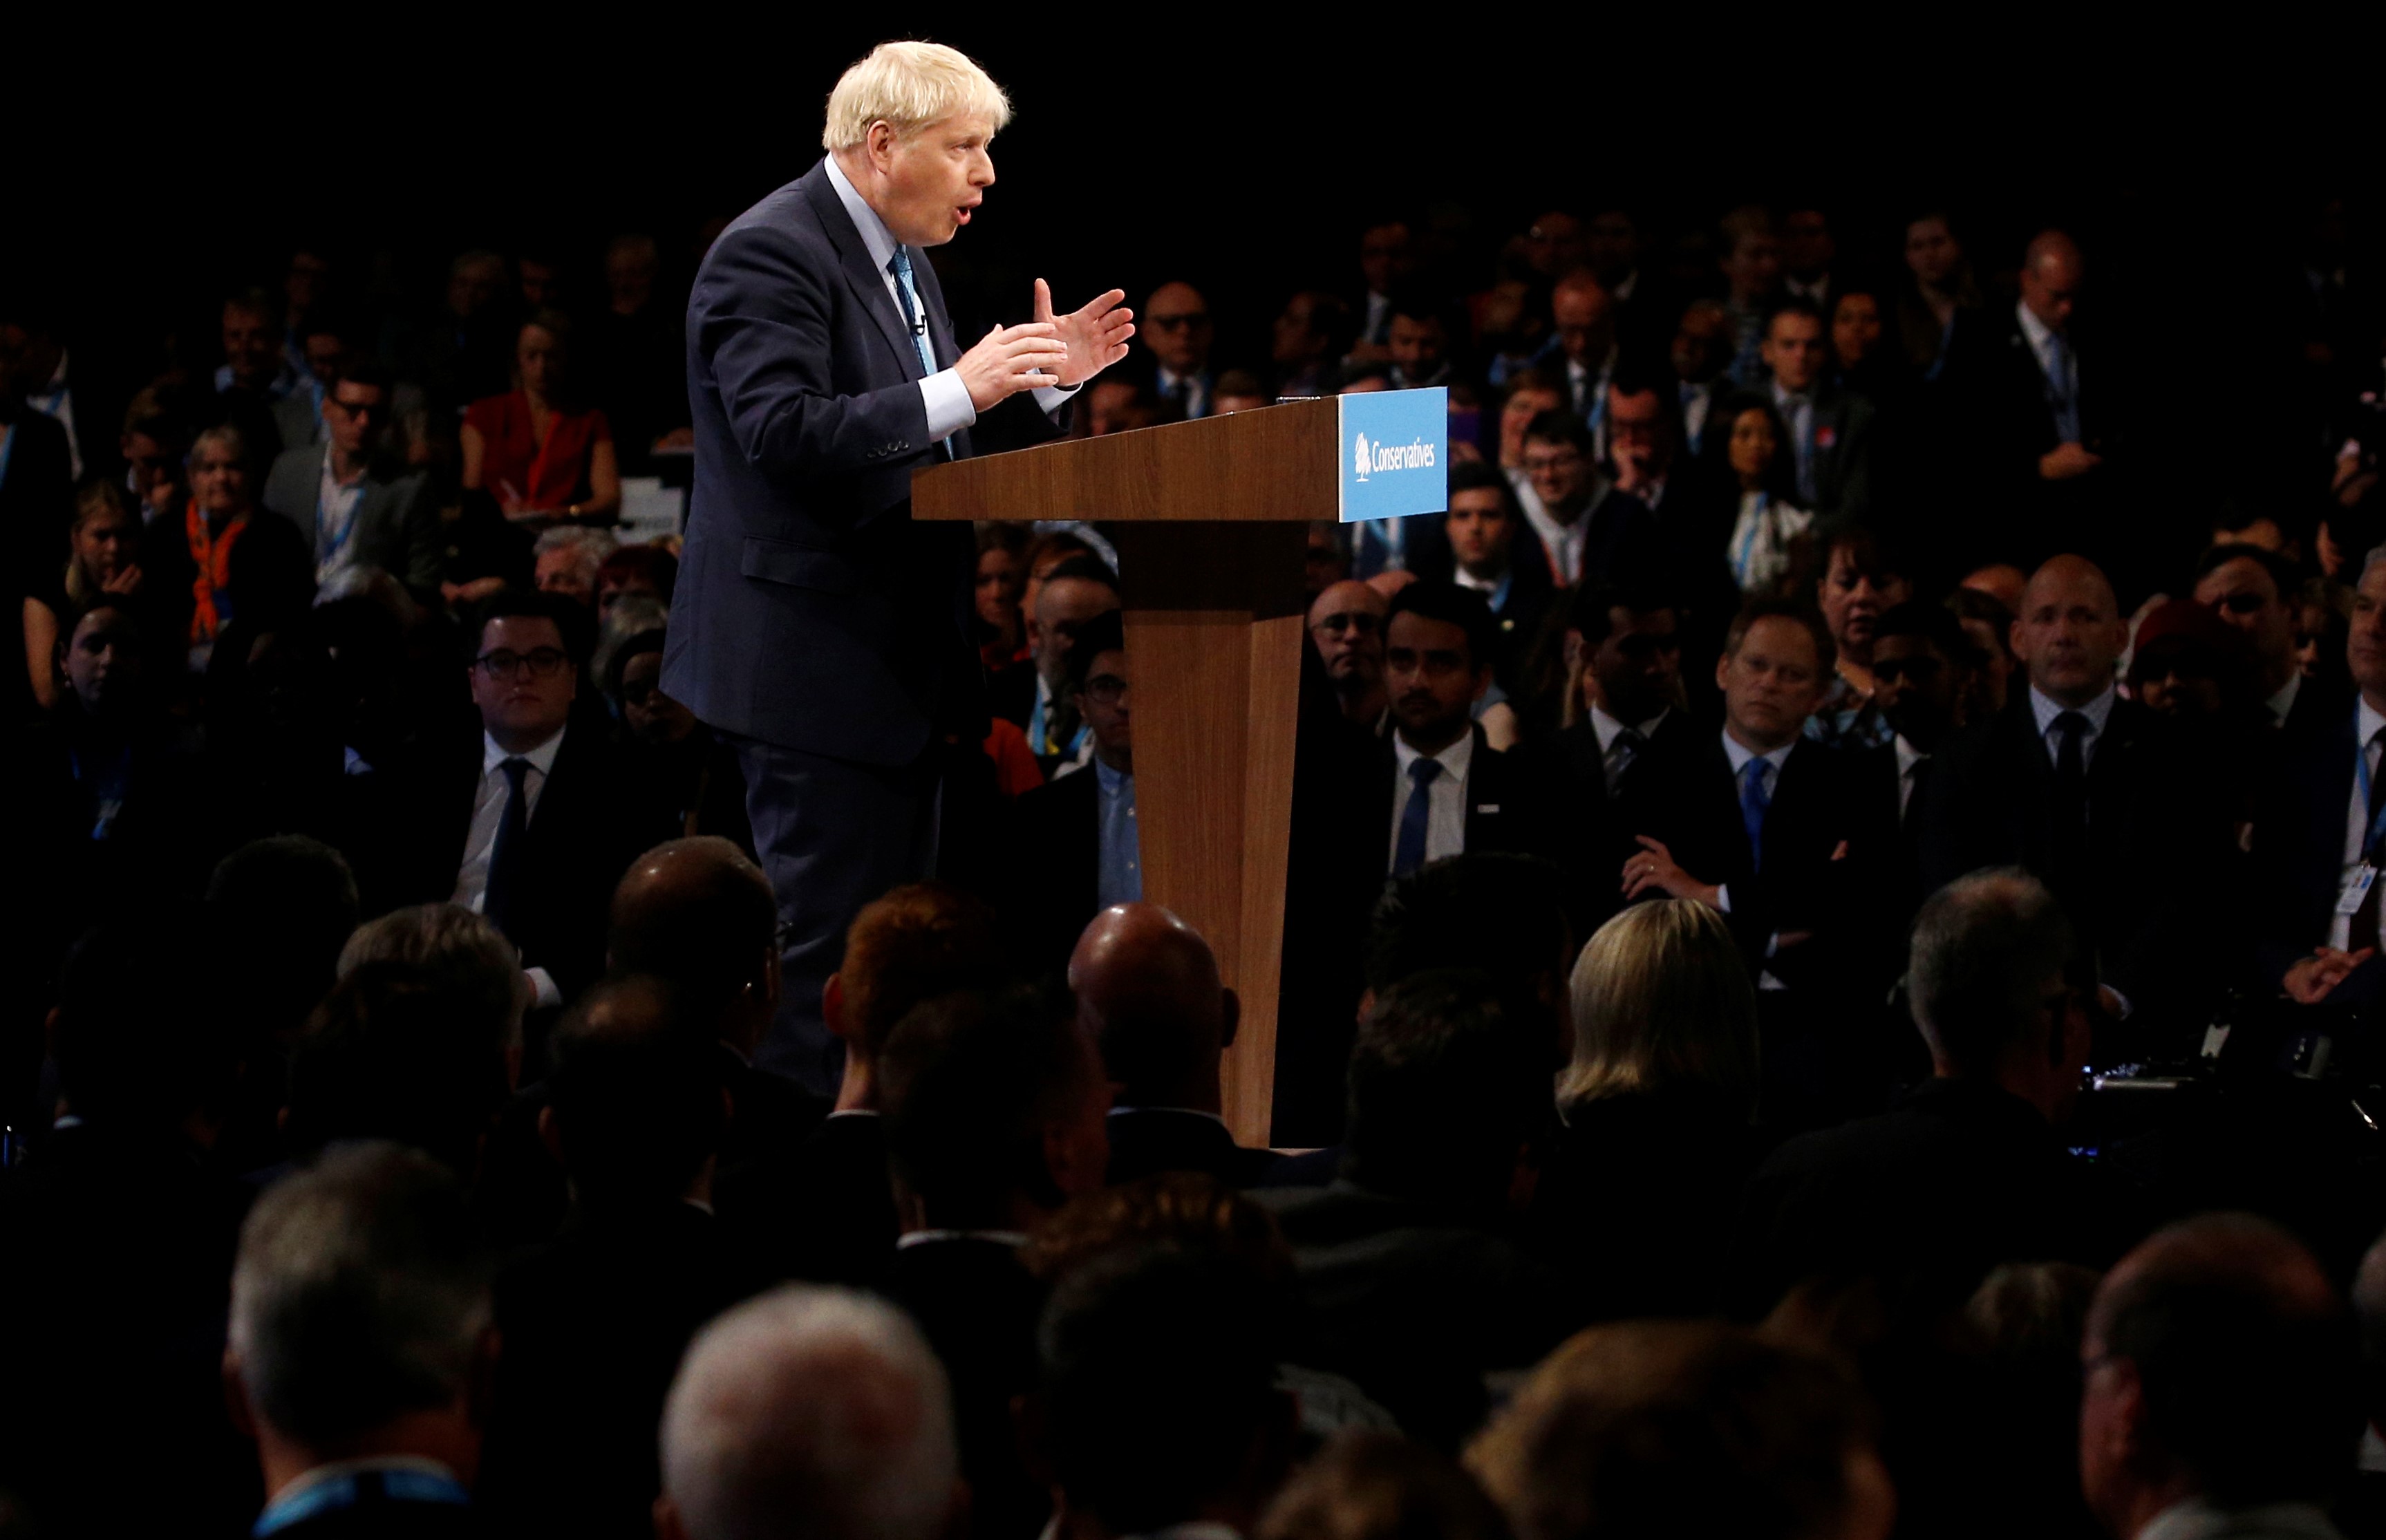 Britain's Prime Minister Boris Johnson gives a closing speech at the Conservative Party annual conference in Manchester on 2 October 2019 (Reuters)